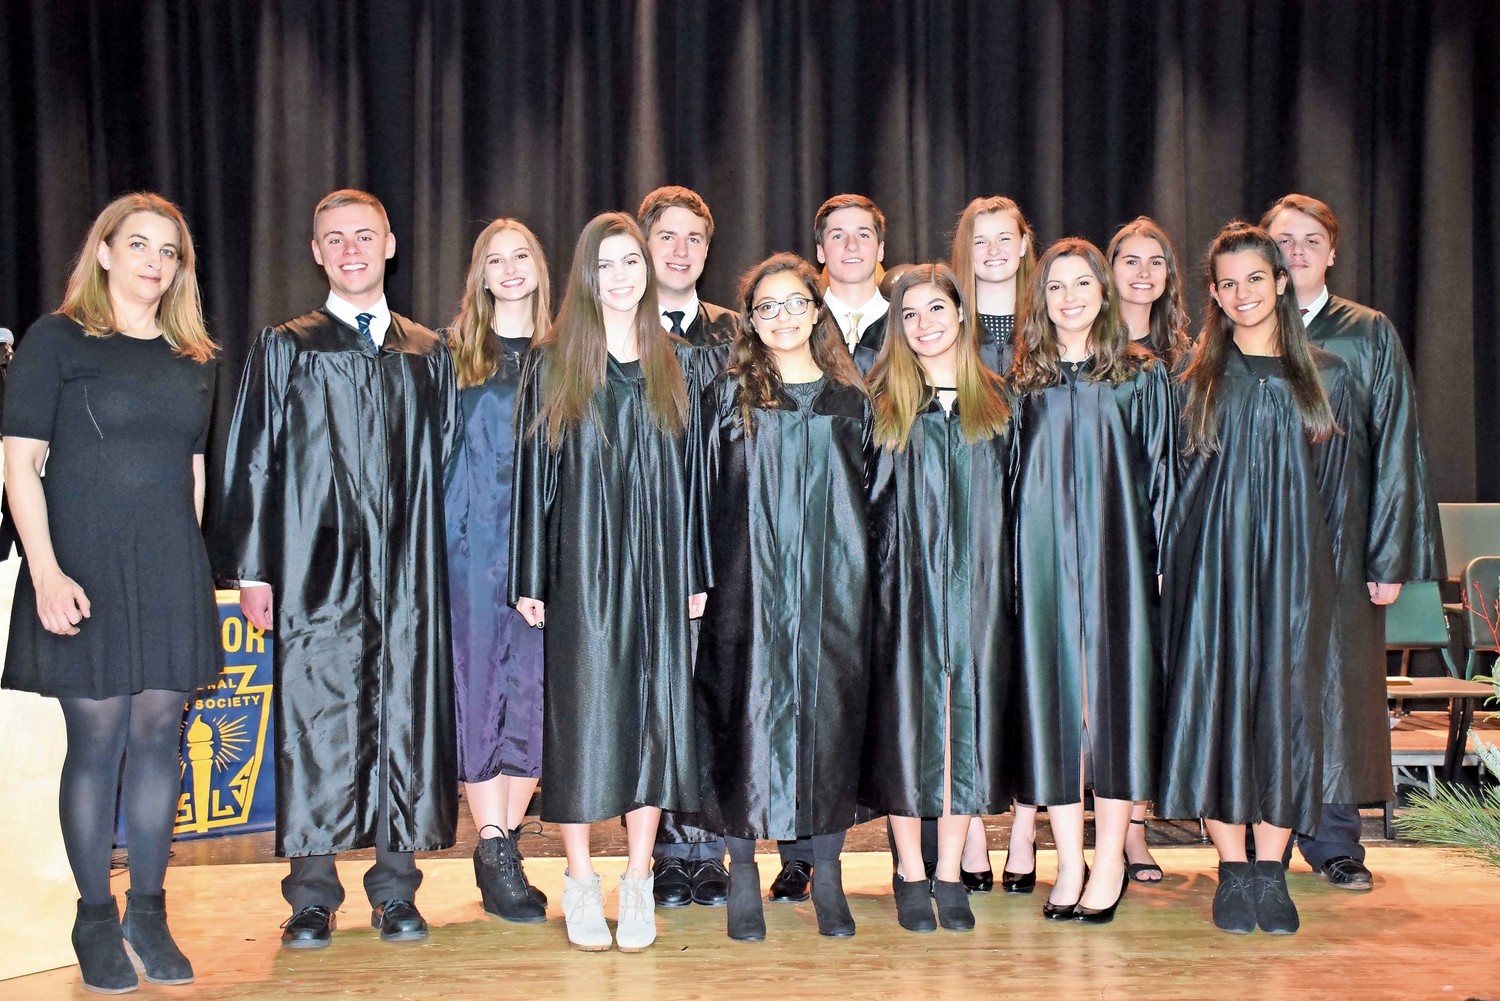 The Wantagh High School National Honor Society inducted 81 students into the organization. Adviser Kali Psihos, far left, stood with the executive board at the candlelighting ceremony. on Nov. 28.